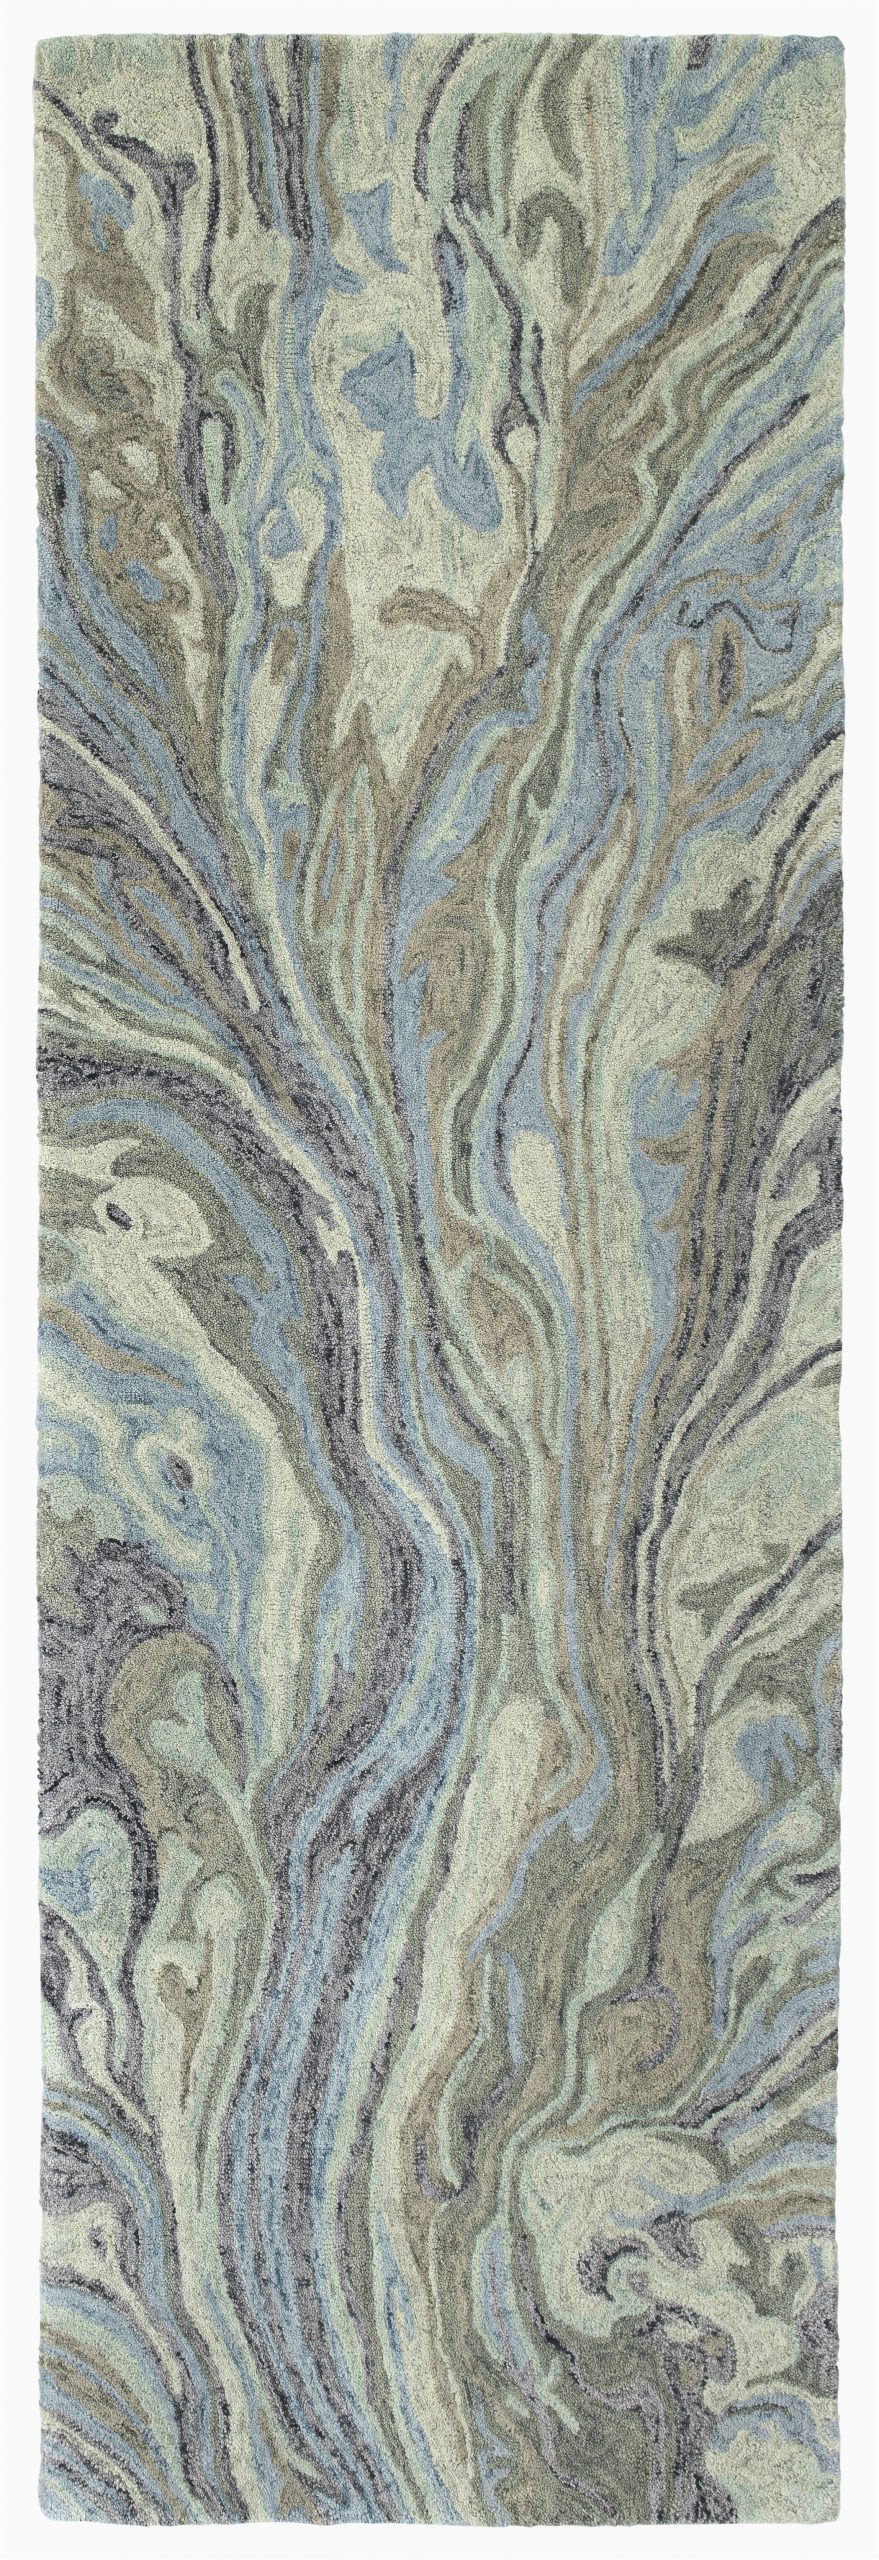 Kaia Blue area Rug Bargas Hand Tufted Wool Pewter Green area Rug